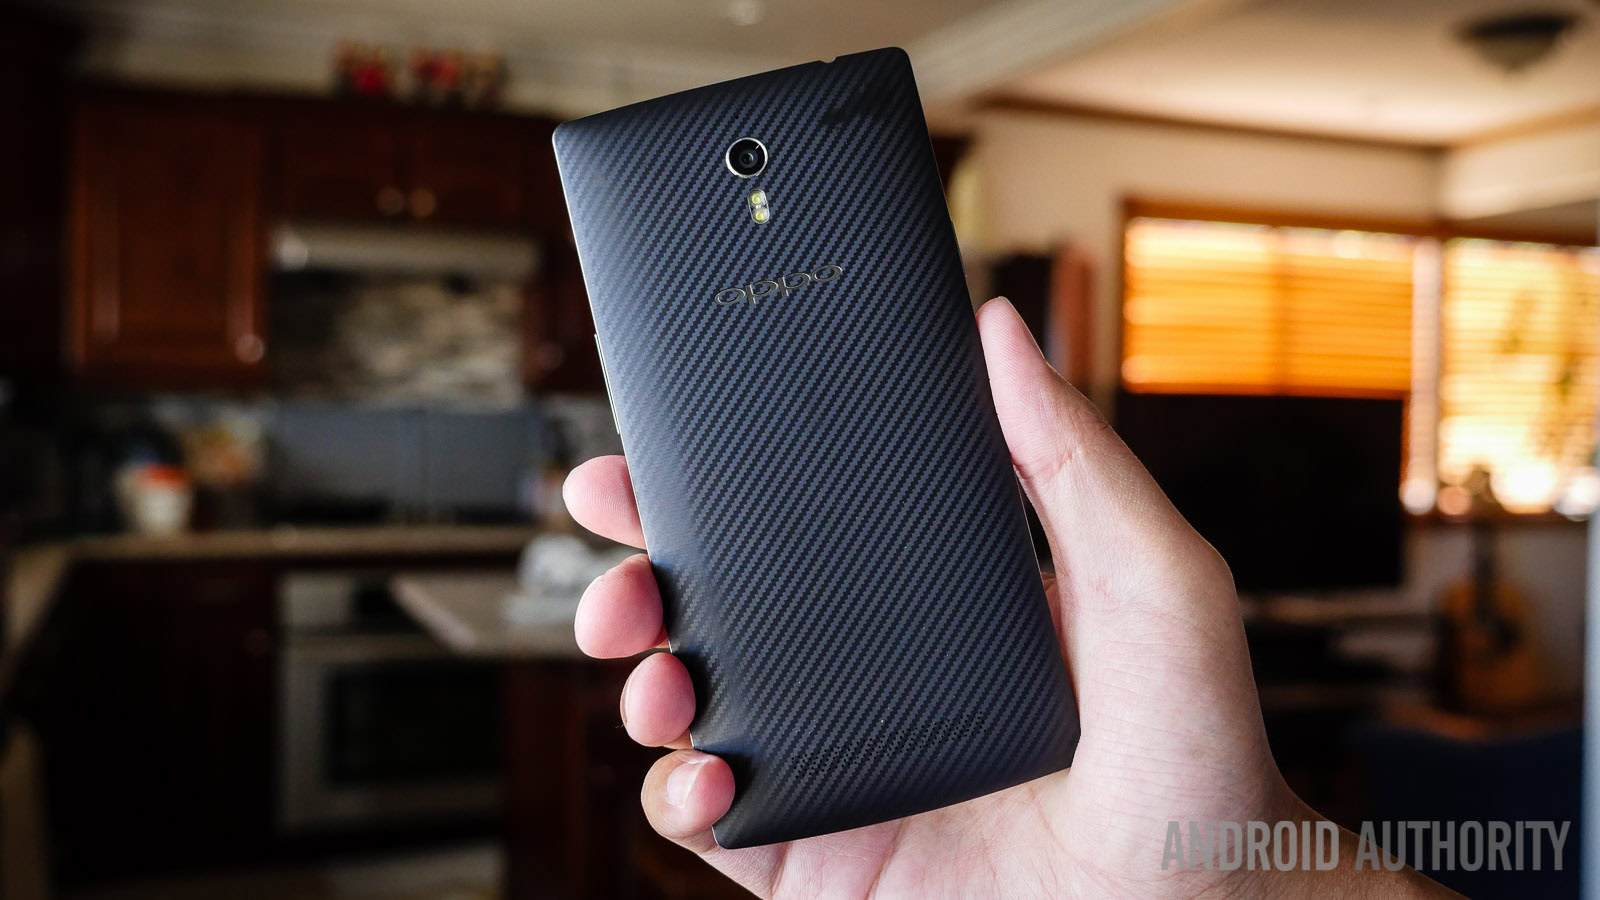 The OPPO Find 7.